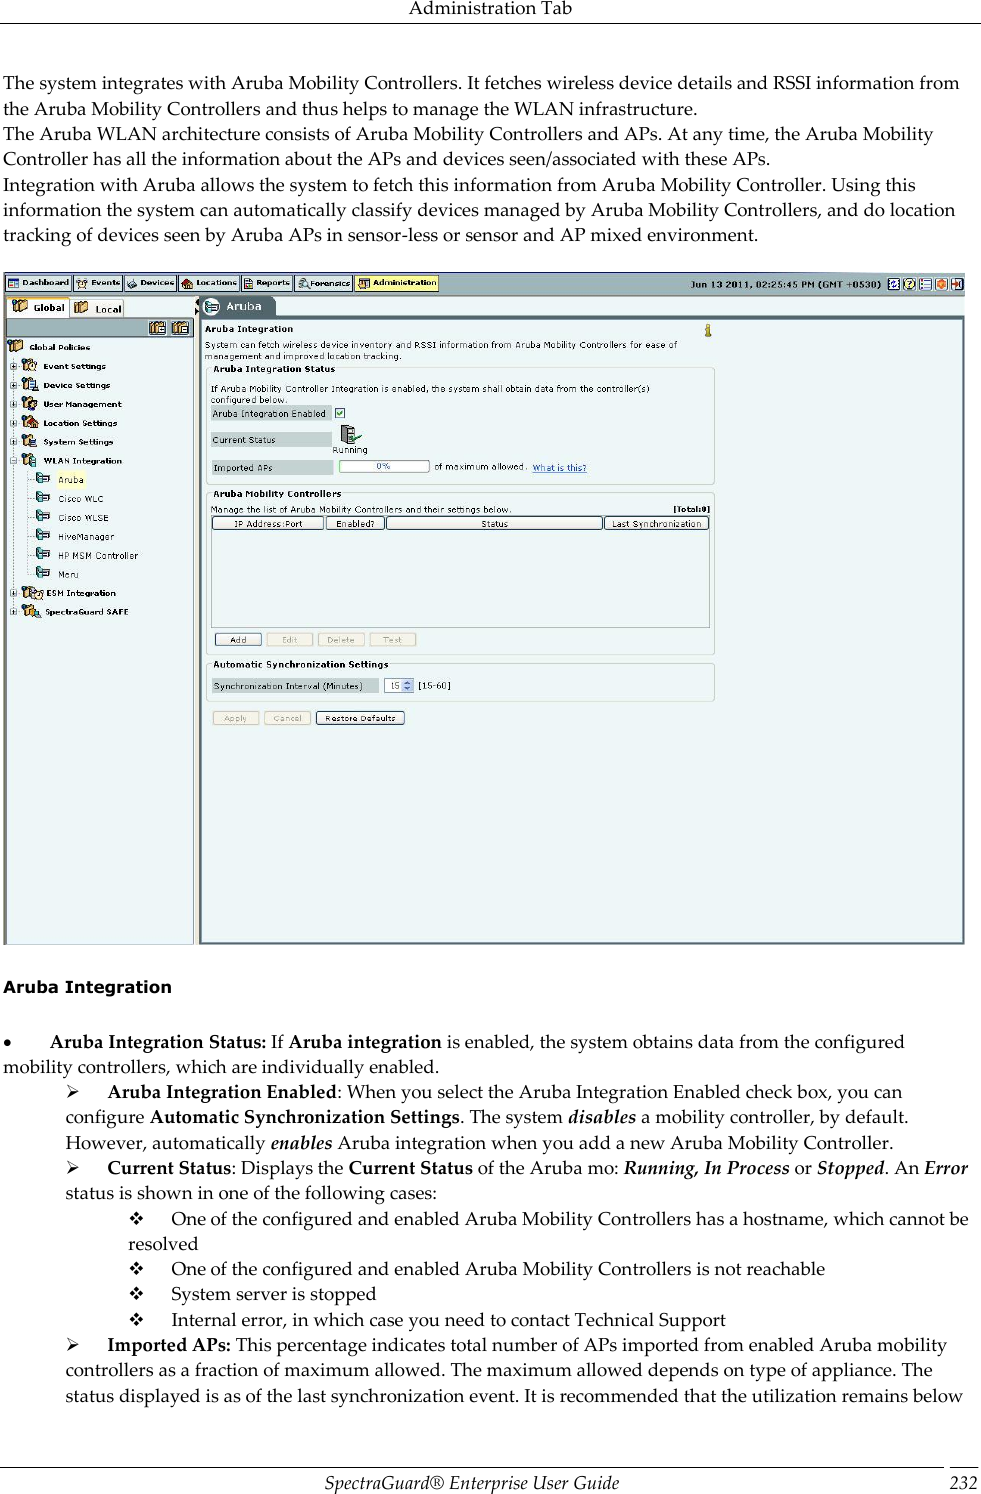 Administration Tab SpectraGuard®  Enterprise User Guide 232 The system integrates with Aruba Mobility Controllers. It fetches wireless device details and RSSI information from the Aruba Mobility Controllers and thus helps to manage the WLAN infrastructure. The Aruba WLAN architecture consists of Aruba Mobility Controllers and APs. At any time, the Aruba Mobility Controller has all the information about the APs and devices seen/associated with these APs. Integration with Aruba allows the system to fetch this information from Aruba Mobility Controller. Using this information the system can automatically classify devices managed by Aruba Mobility Controllers, and do location tracking of devices seen by Aruba APs in sensor-less or sensor and AP mixed environment.      Aruba Integration             Aruba Integration Status: If Aruba integration is enabled, the system obtains data from the configured mobility controllers, which are individually enabled.        Aruba Integration Enabled: When you select the Aruba Integration Enabled check box, you can configure Automatic Synchronization Settings. The system disables a mobility controller, by default. However, automatically enables Aruba integration when you add a new Aruba Mobility Controller.        Current Status: Displays the Current Status of the Aruba mo: Running, In Process or Stopped. An Error status is shown in one of the following cases:        One of the configured and enabled Aruba Mobility Controllers has a hostname, which cannot be resolved        One of the configured and enabled Aruba Mobility Controllers is not reachable        System server is stopped        Internal error, in which case you need to contact Technical Support        Imported APs: This percentage indicates total number of APs imported from enabled Aruba mobility controllers as a fraction of maximum allowed. The maximum allowed depends on type of appliance. The status displayed is as of the last synchronization event. It is recommended that the utilization remains below 